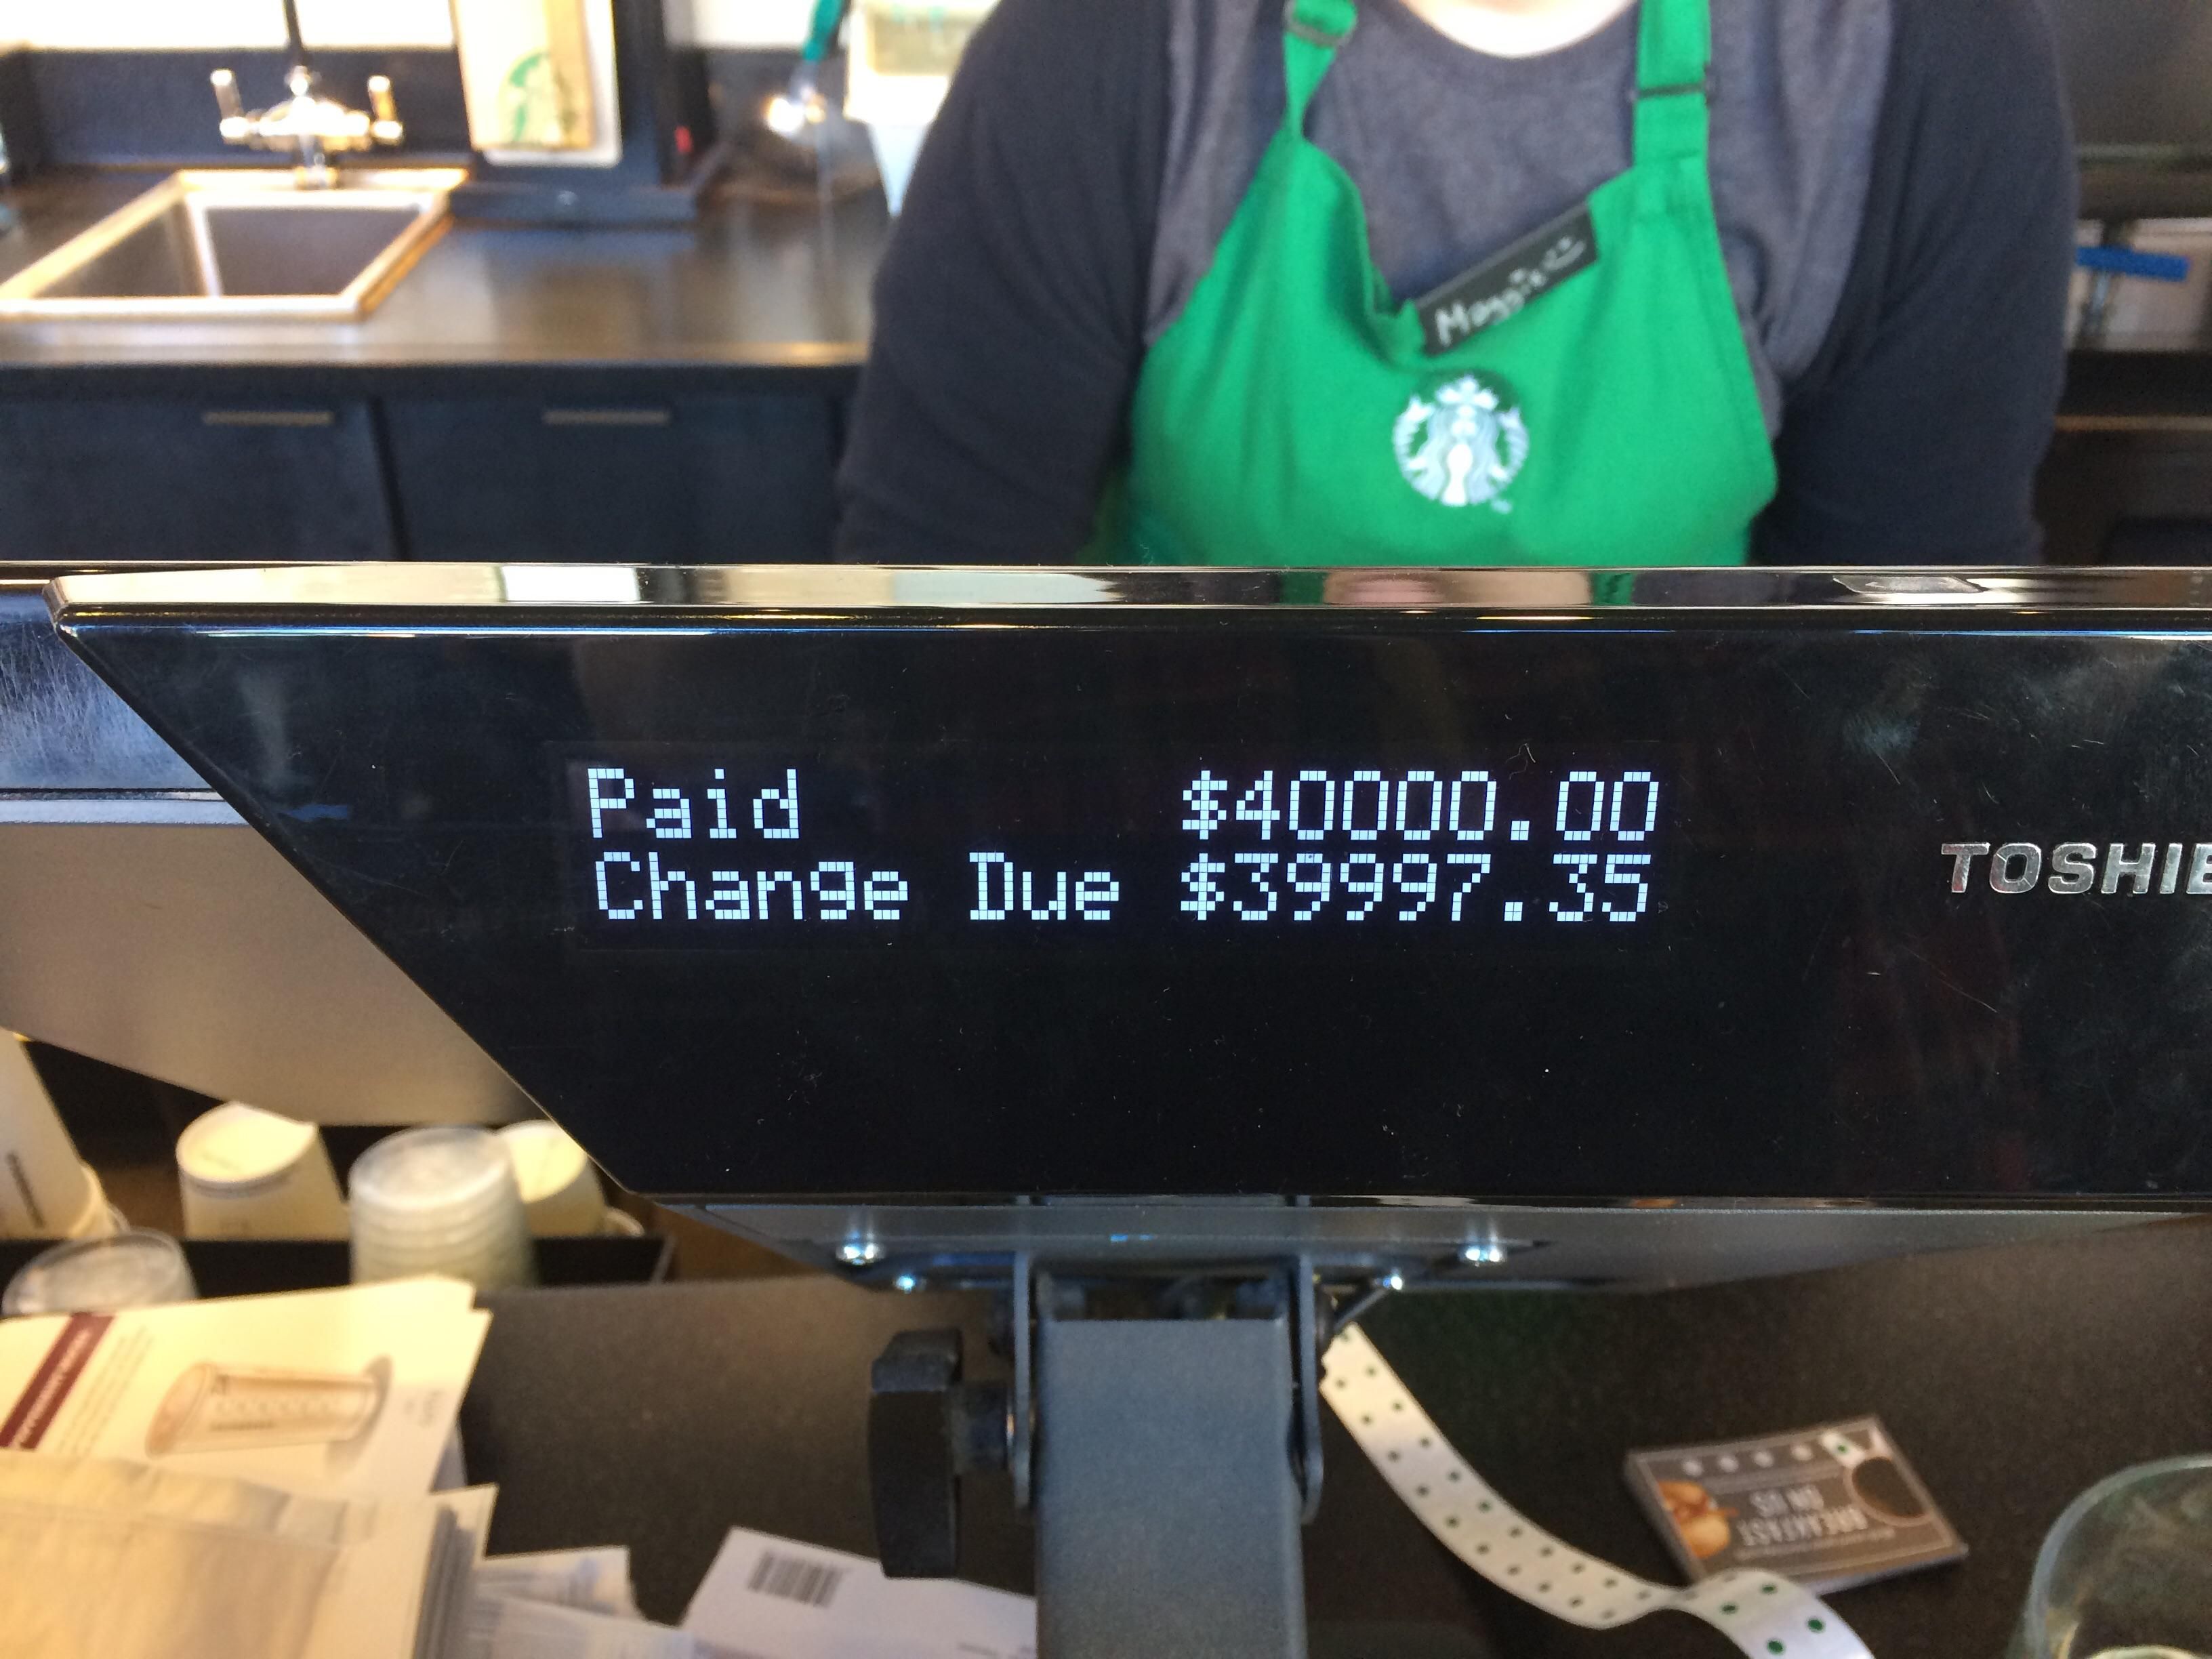 Sorry Starbucks, but I had to break that large bill SOMEWHERE..!